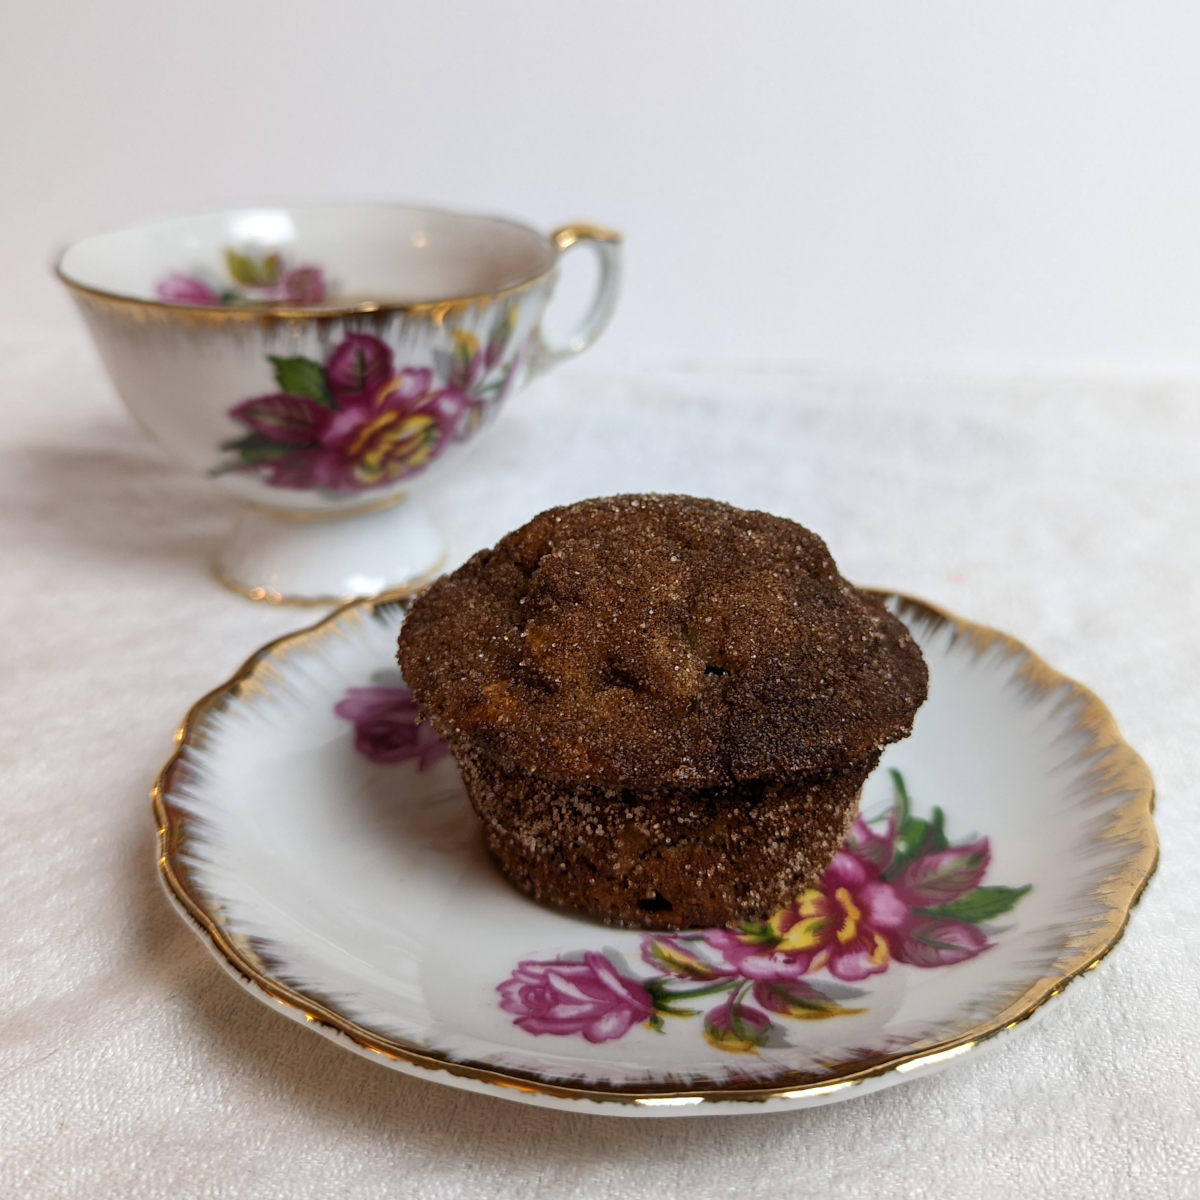 cinnamon sugar banana bread muffin on a floral plate with a matching tea cup.